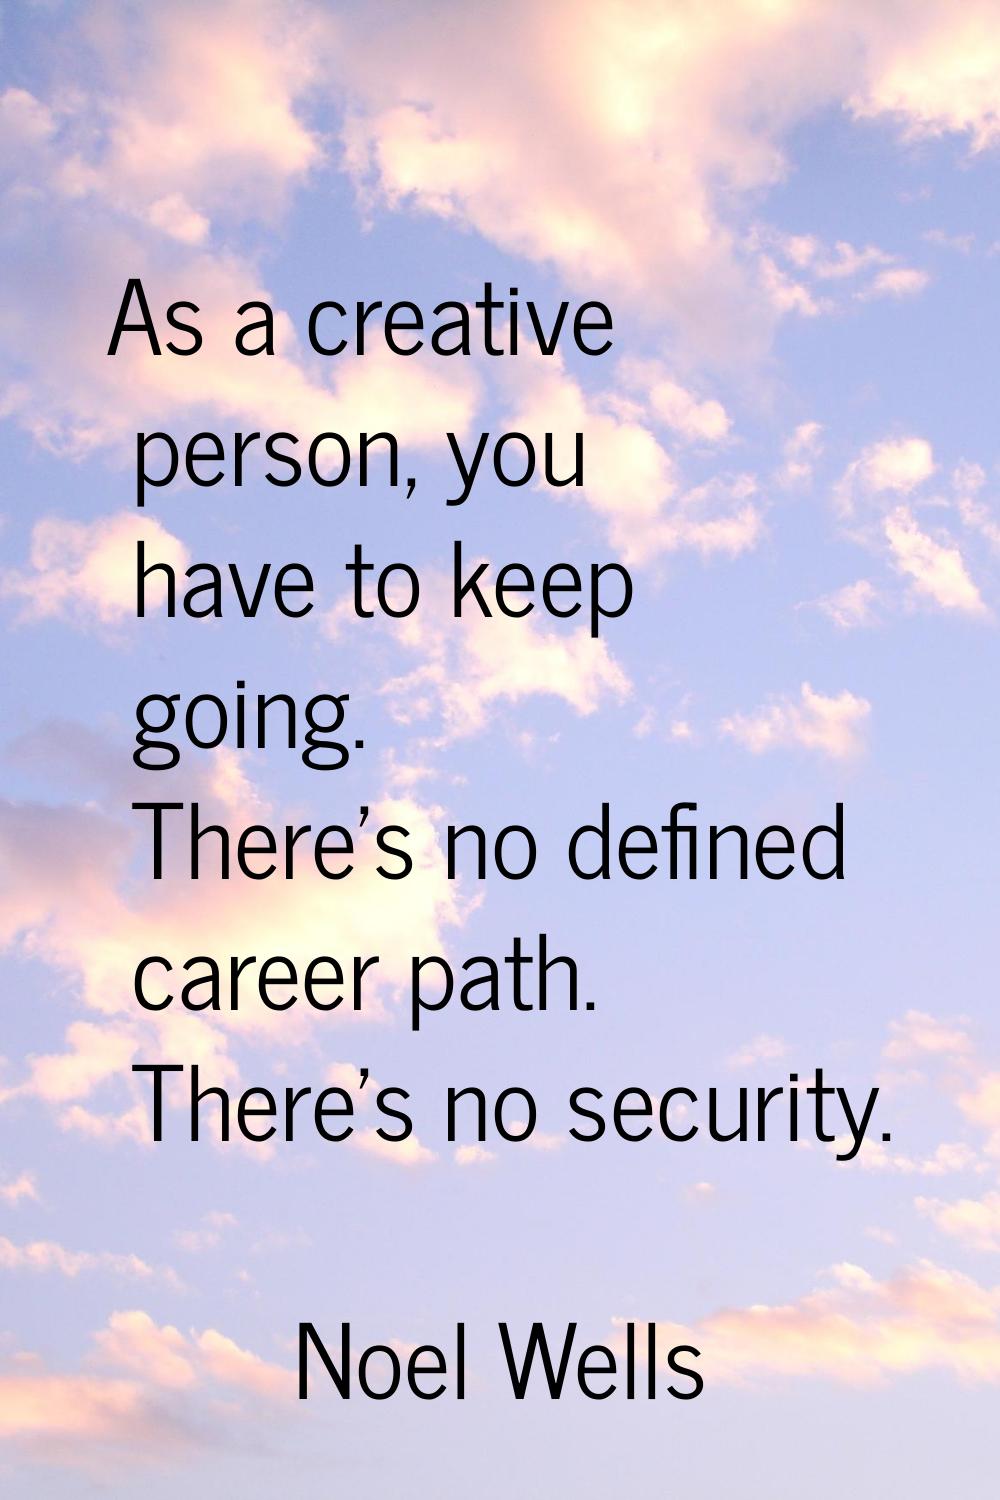 As a creative person, you have to keep going. There's no defined career path. There's no security.